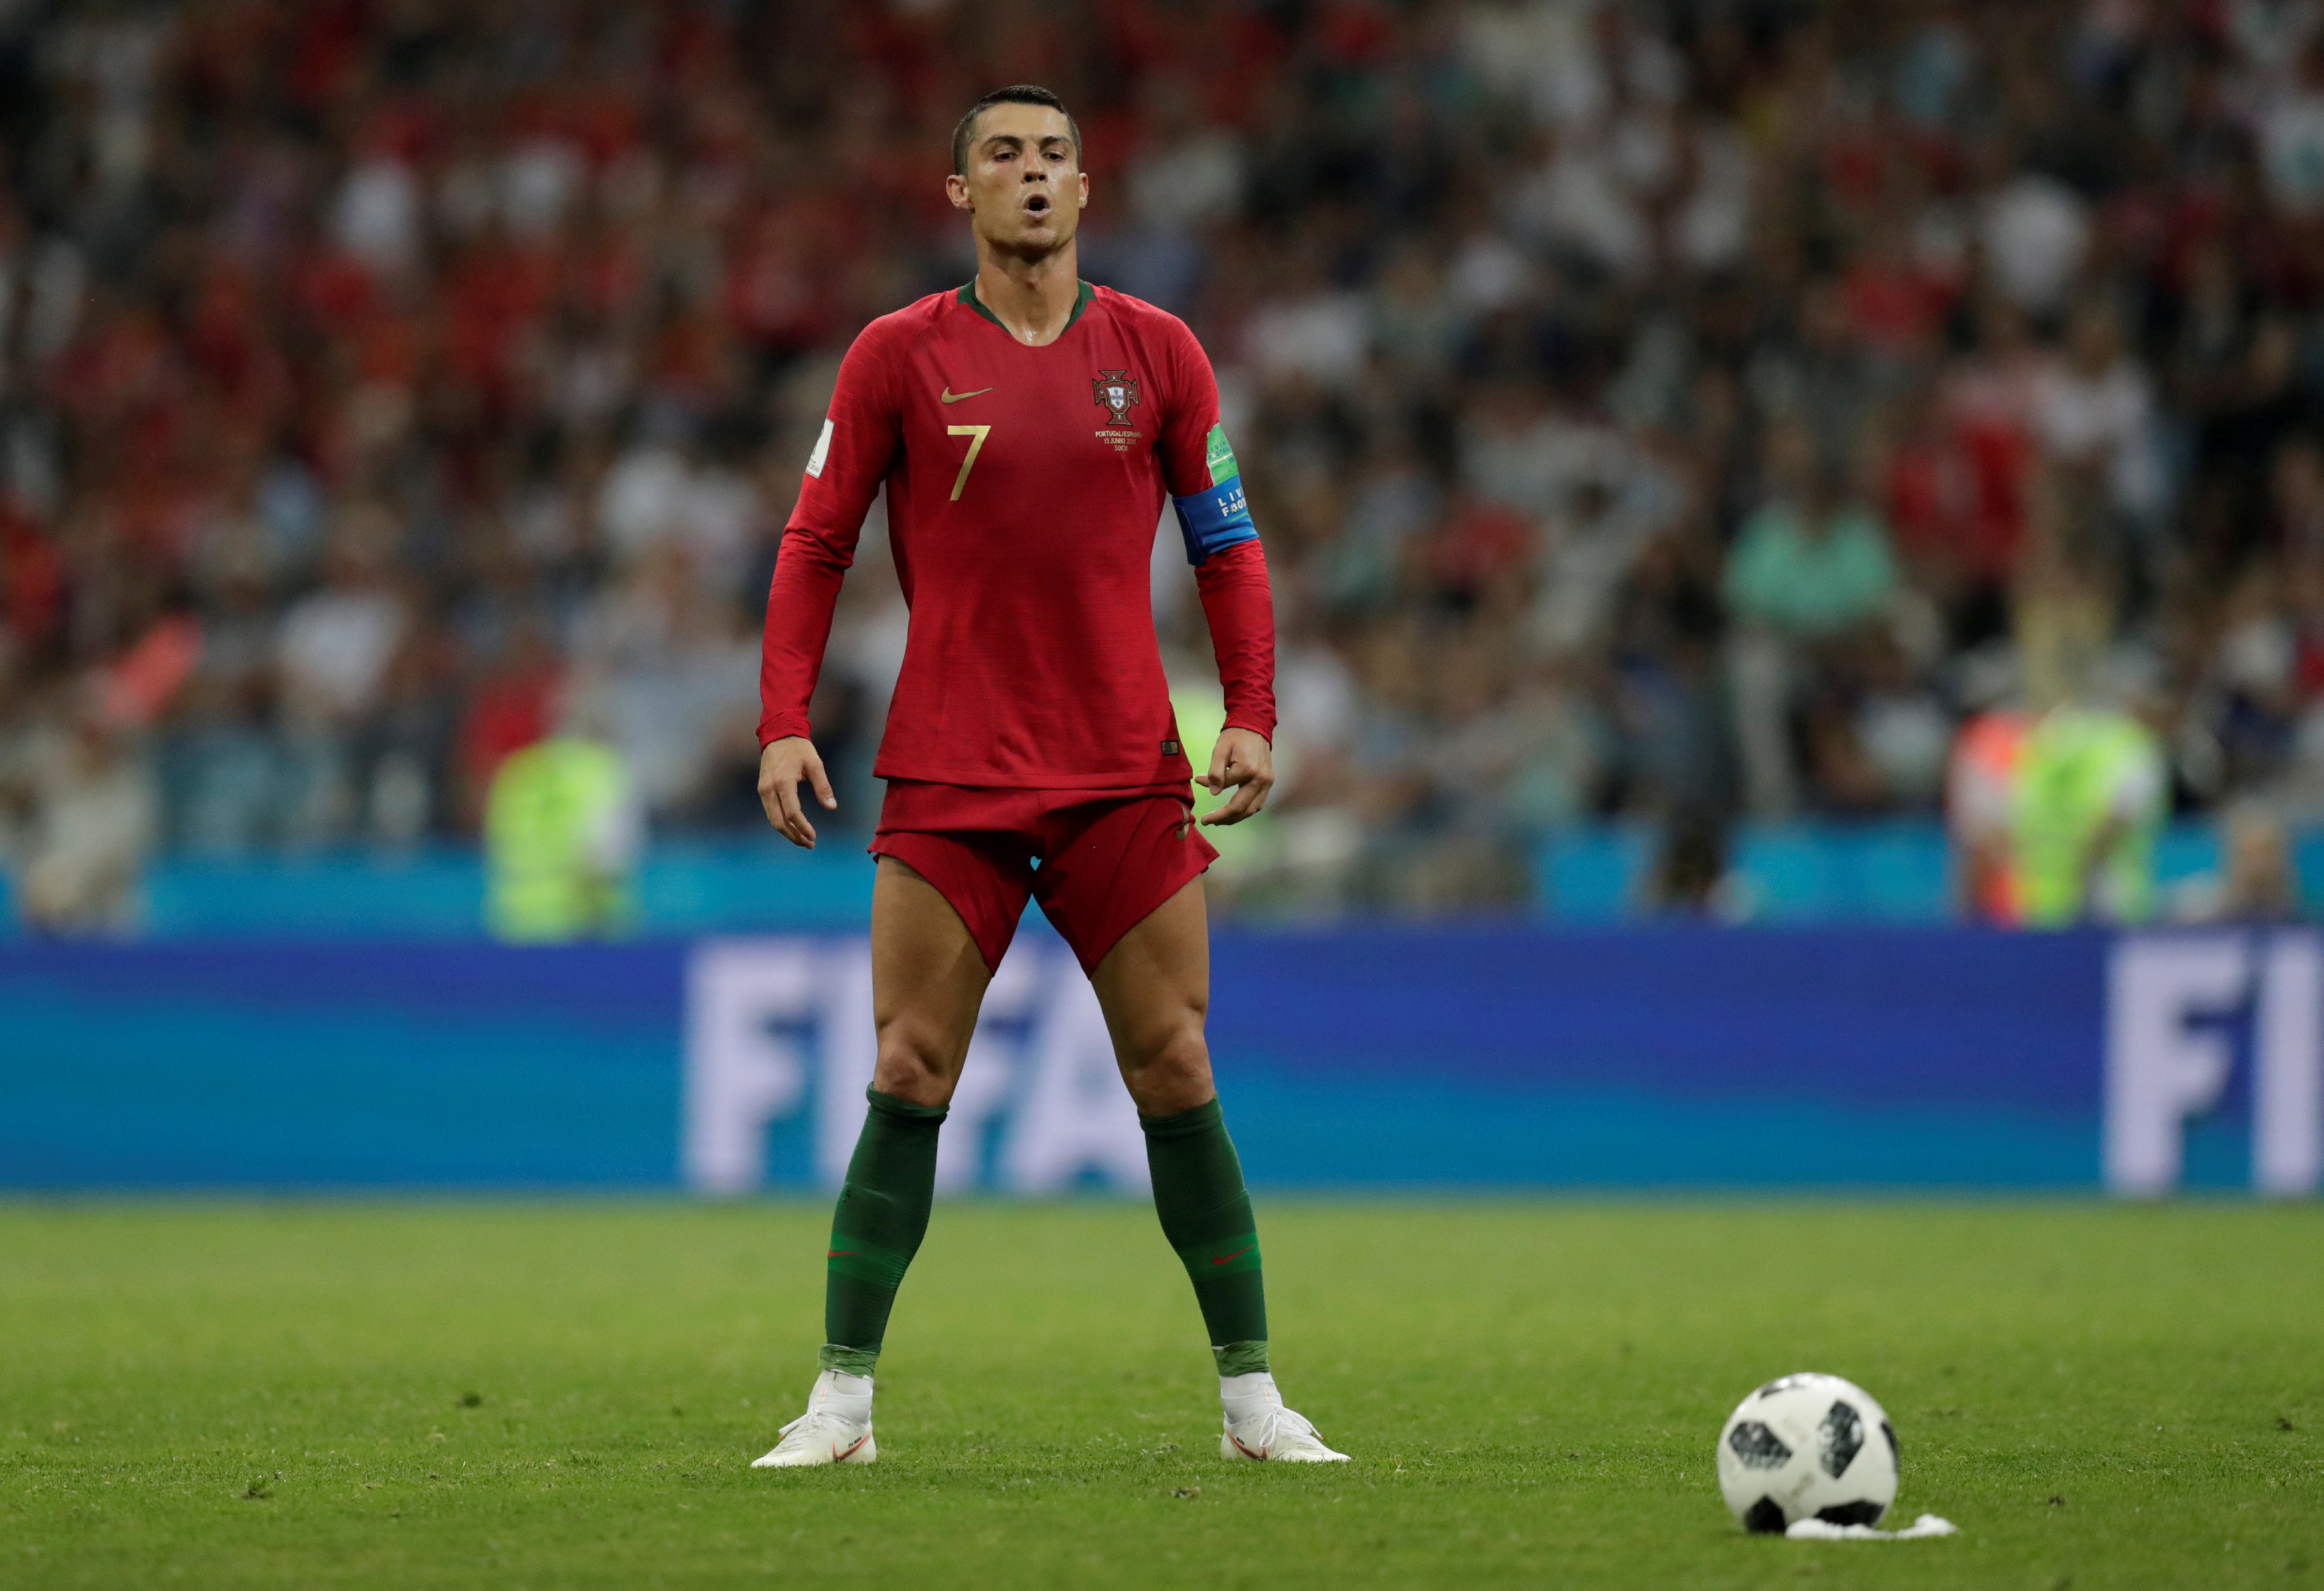 2018-07-13t183548z_514911017_rc1731fbc850_rtrmadp_3_soccer-worldcup-review.jpg